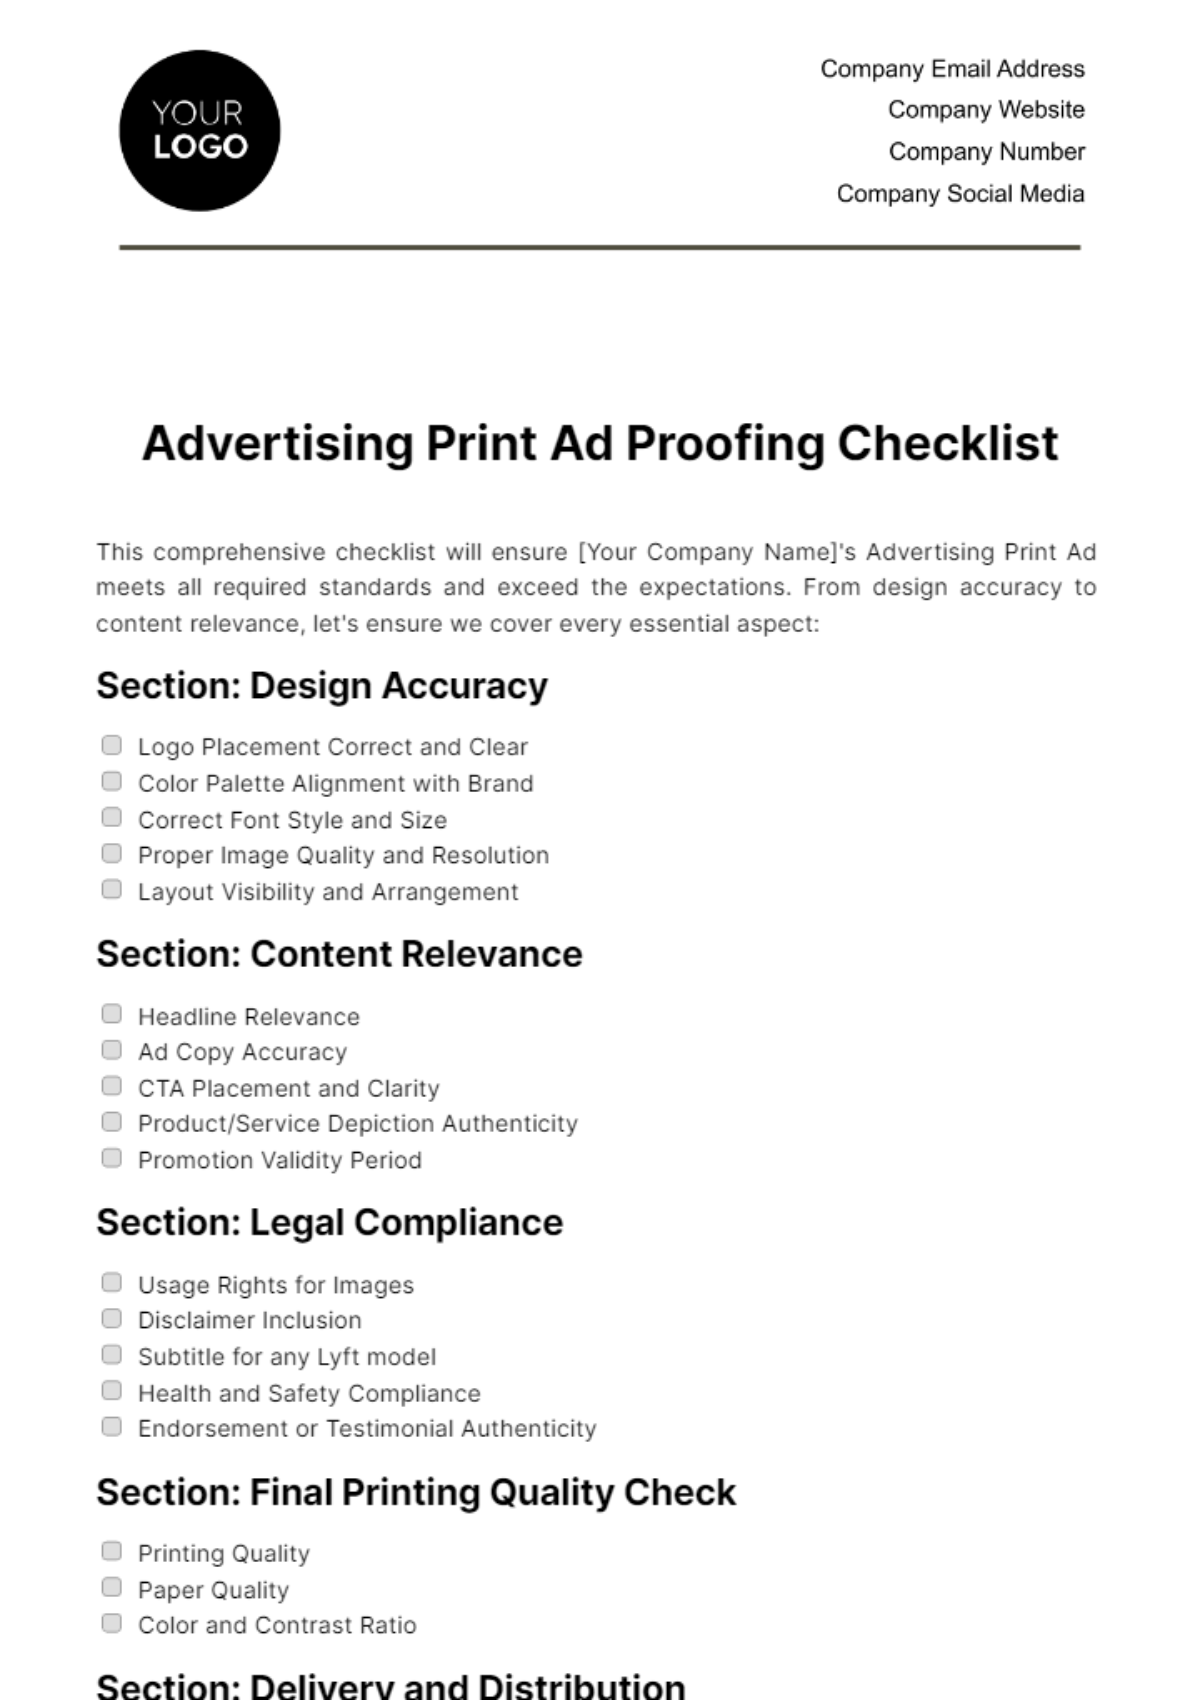 Advertising Print Ad Proofing Checklist Template